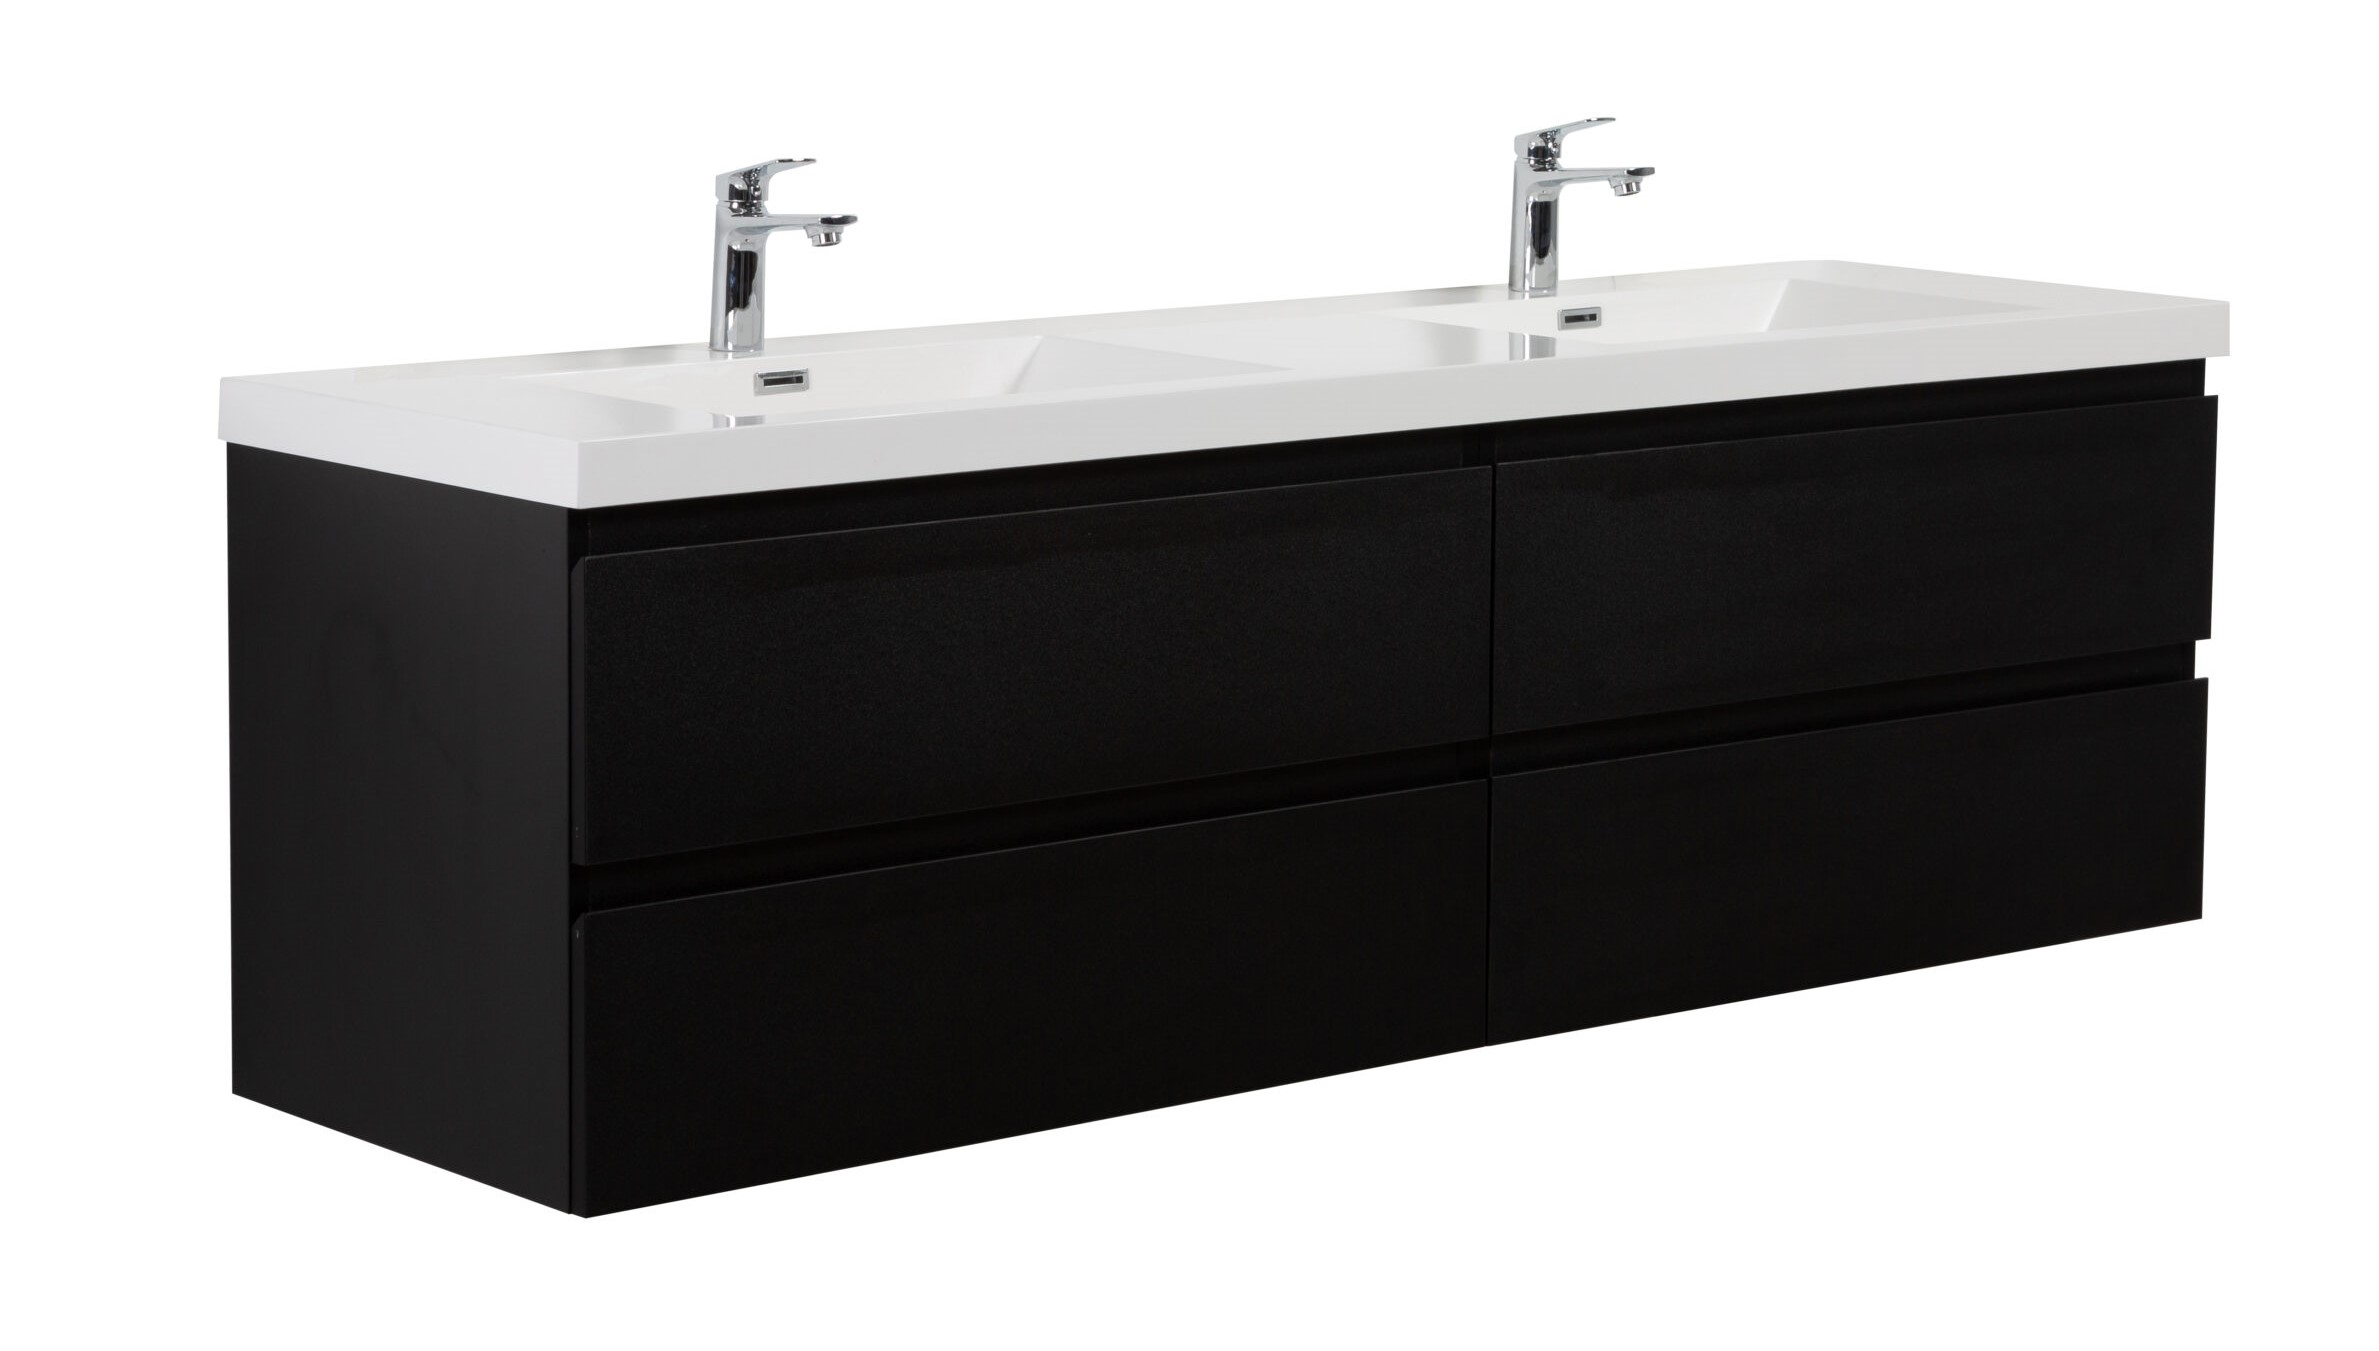 Aurora 72" Matte Midnight Black Wall Hung Double Sink Bathroom Vanity with White Acrylic Countertop